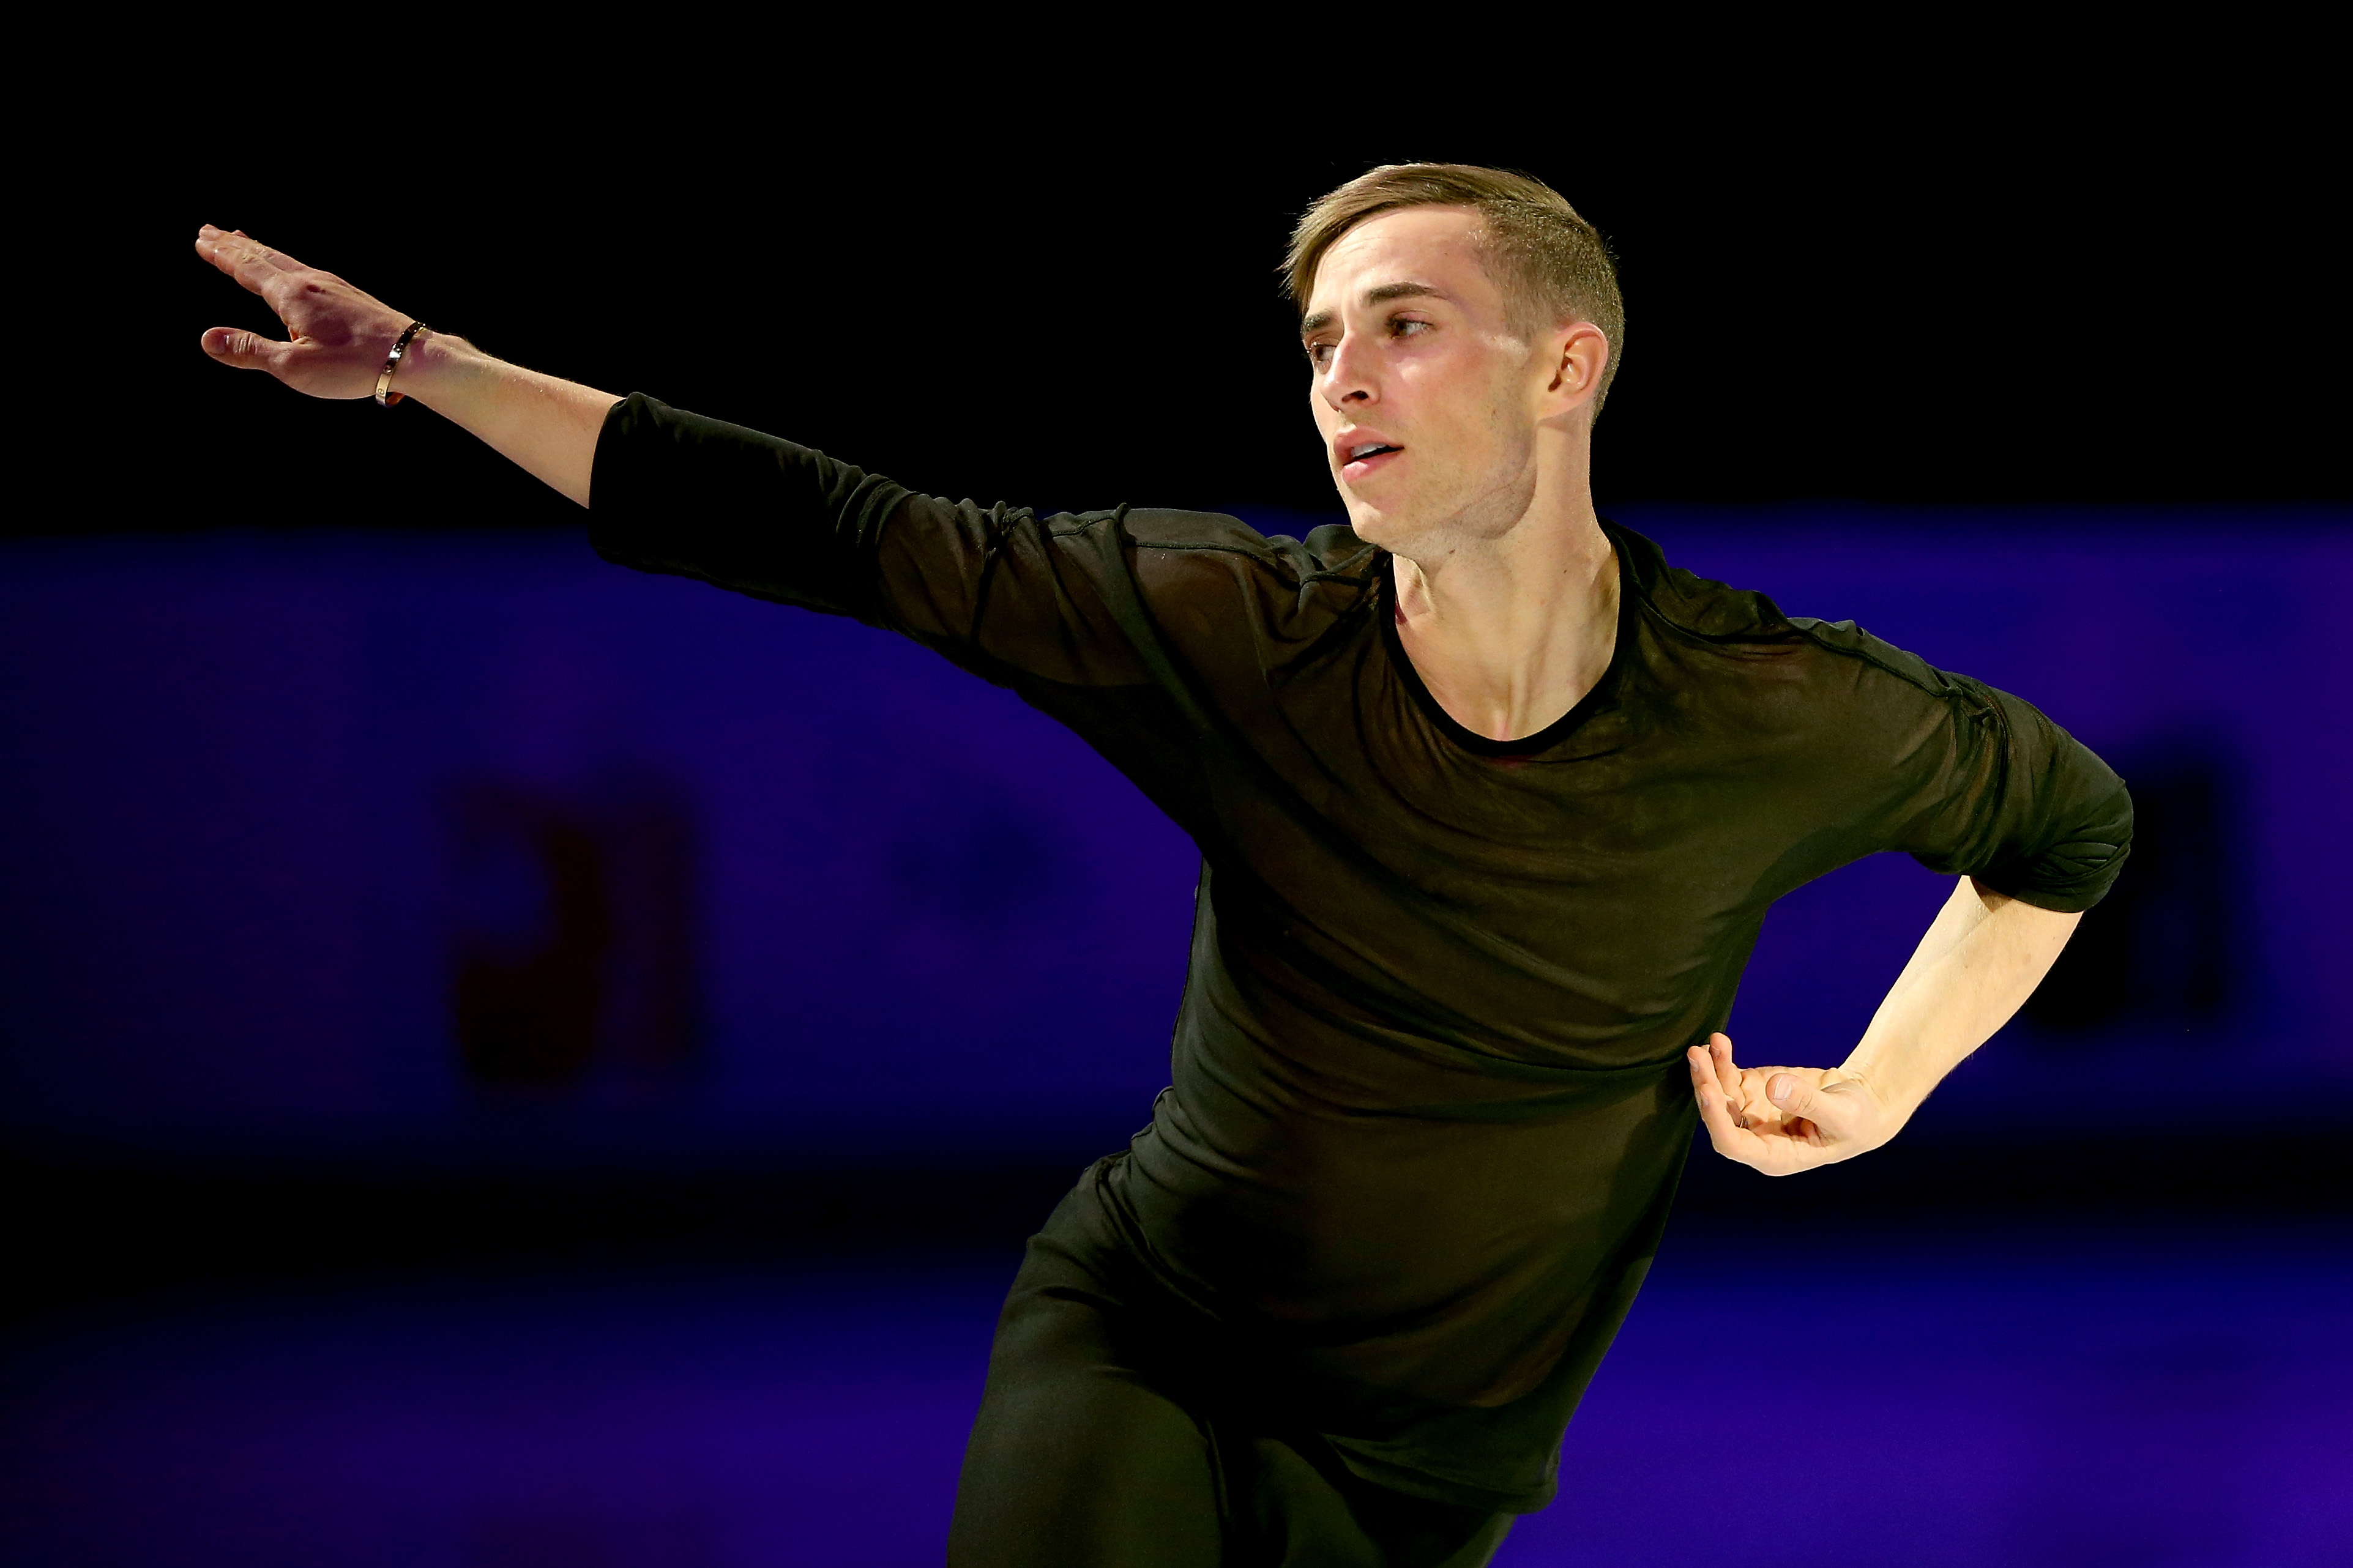 Adam Rippon skates in the Smucker's Skating Spectacular during the 2018 Prudential U.S. Figure Skating Championships at the SAP Center on January 7, 2018 in San Jose, California. (Matthew Stockman—Getty Images)